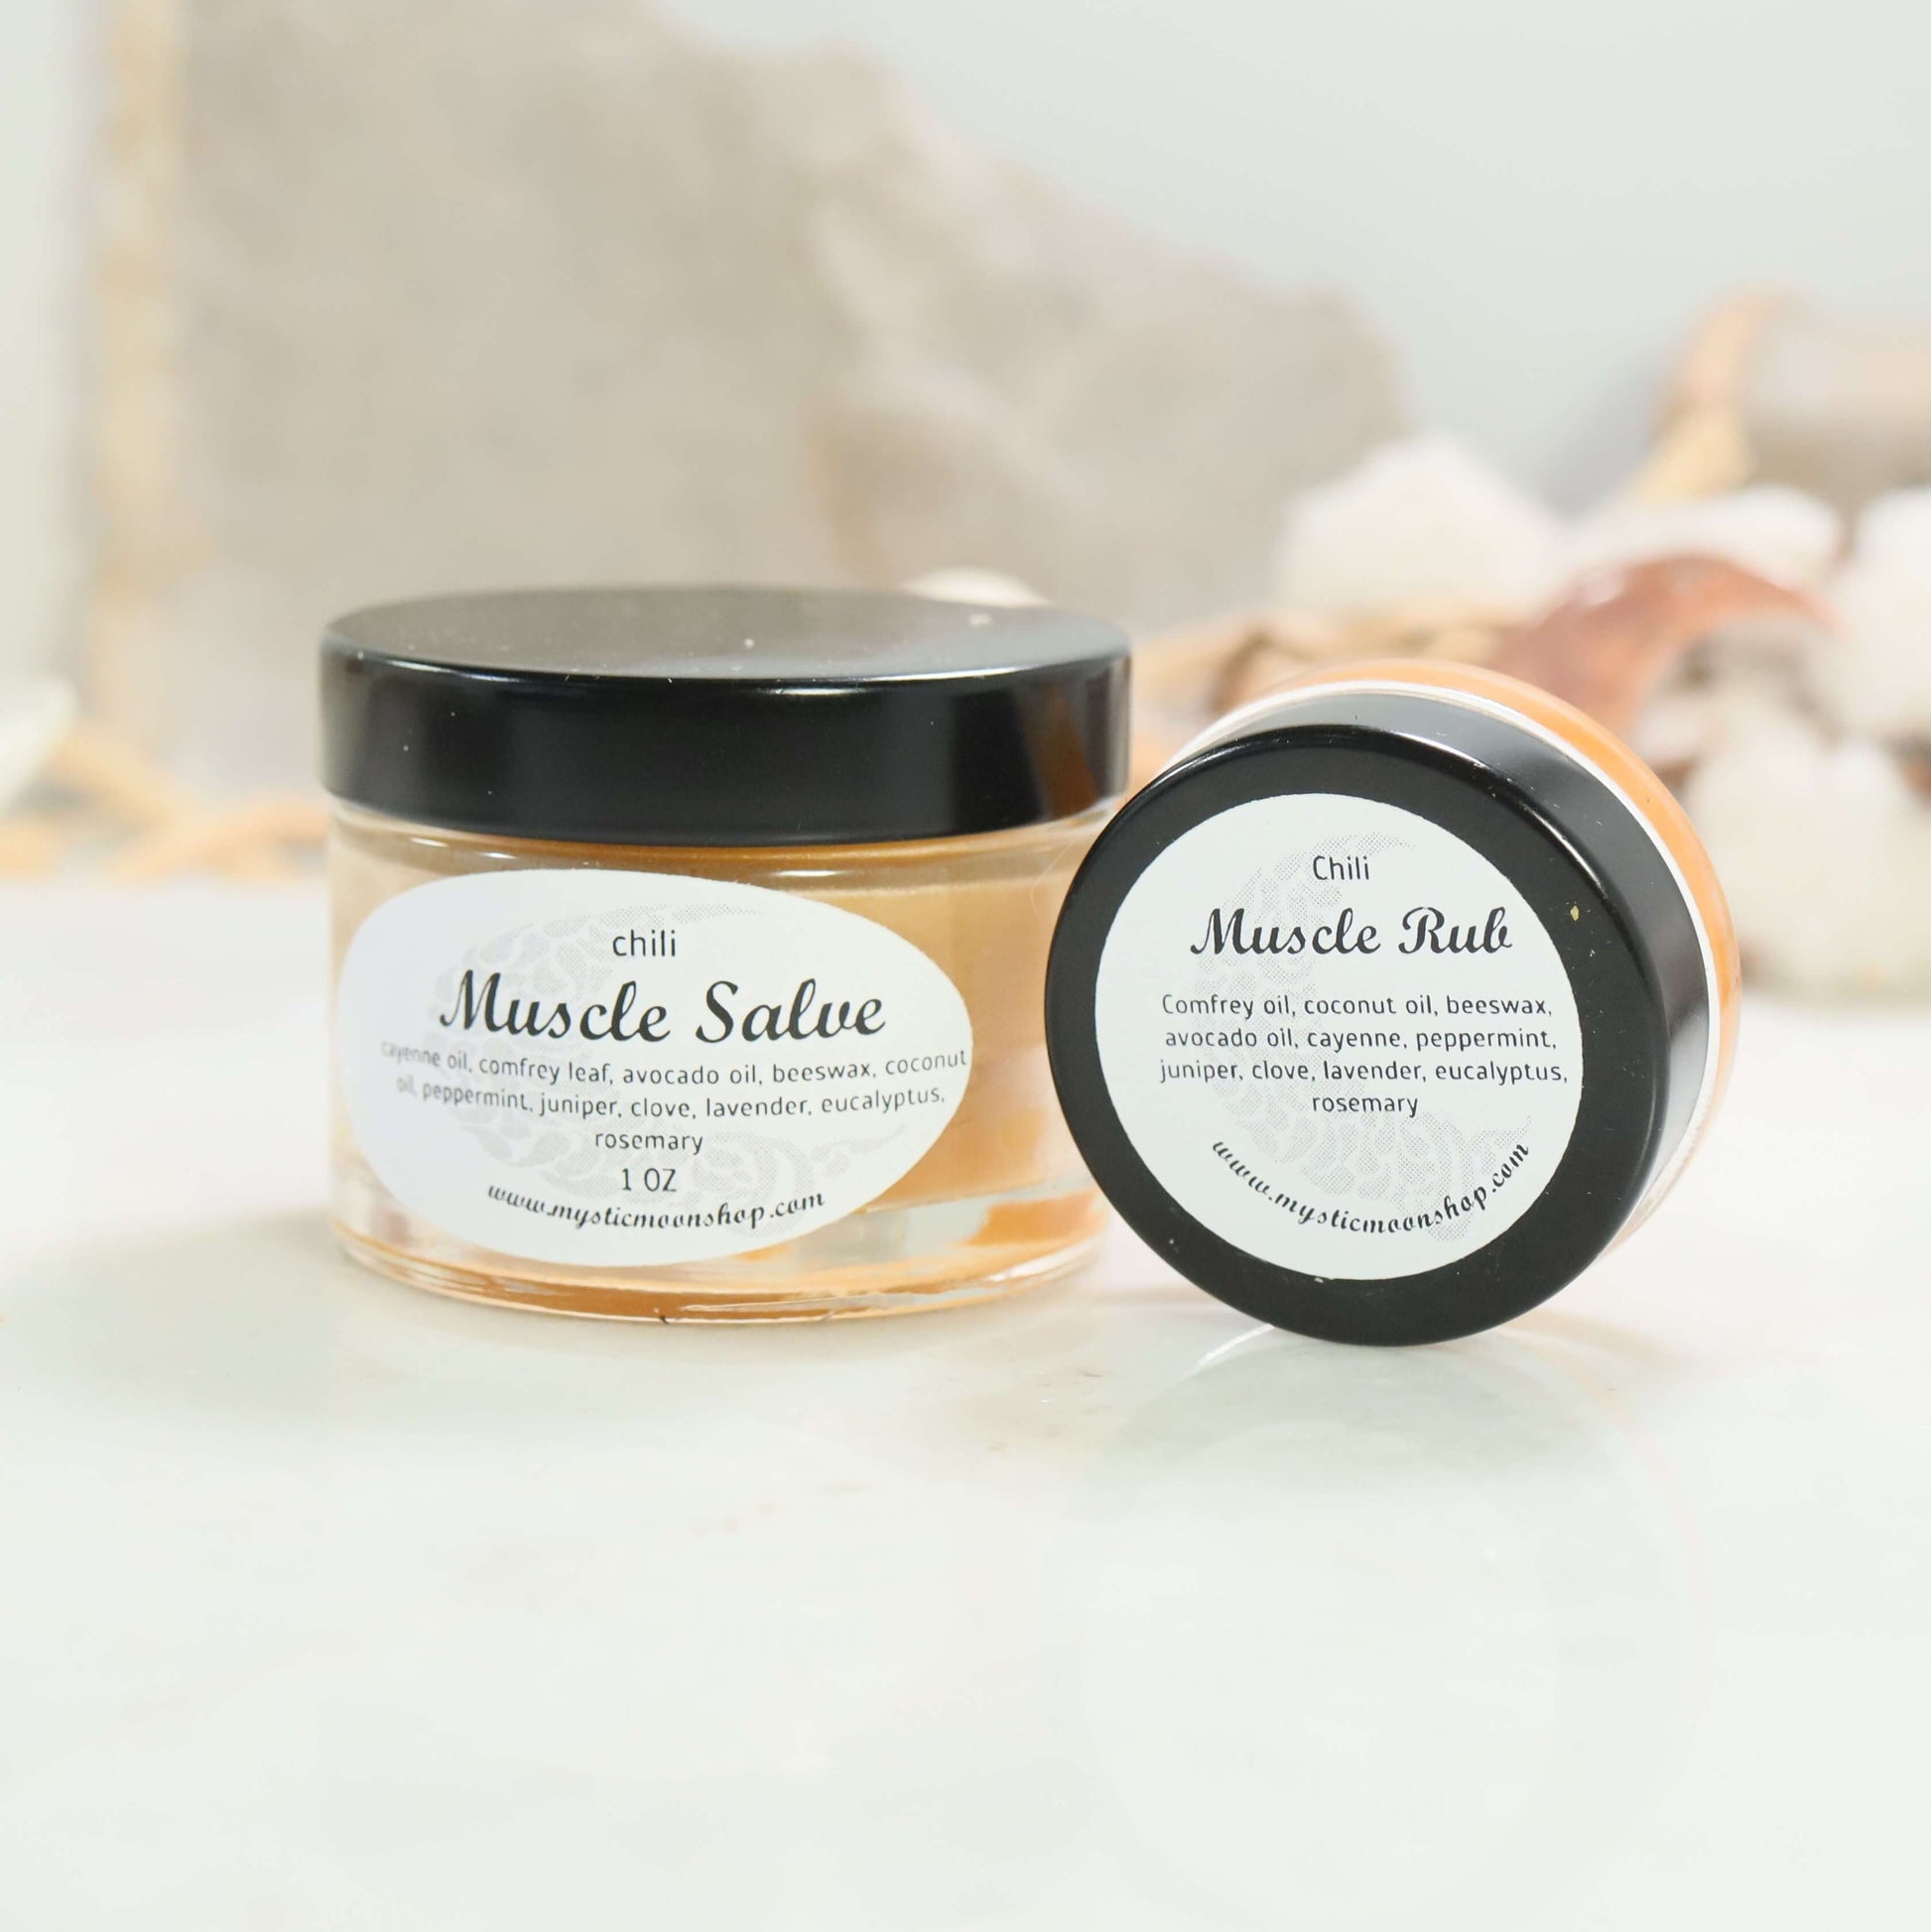 All Natural Chili Muscle Salve Mystic Moon Shop